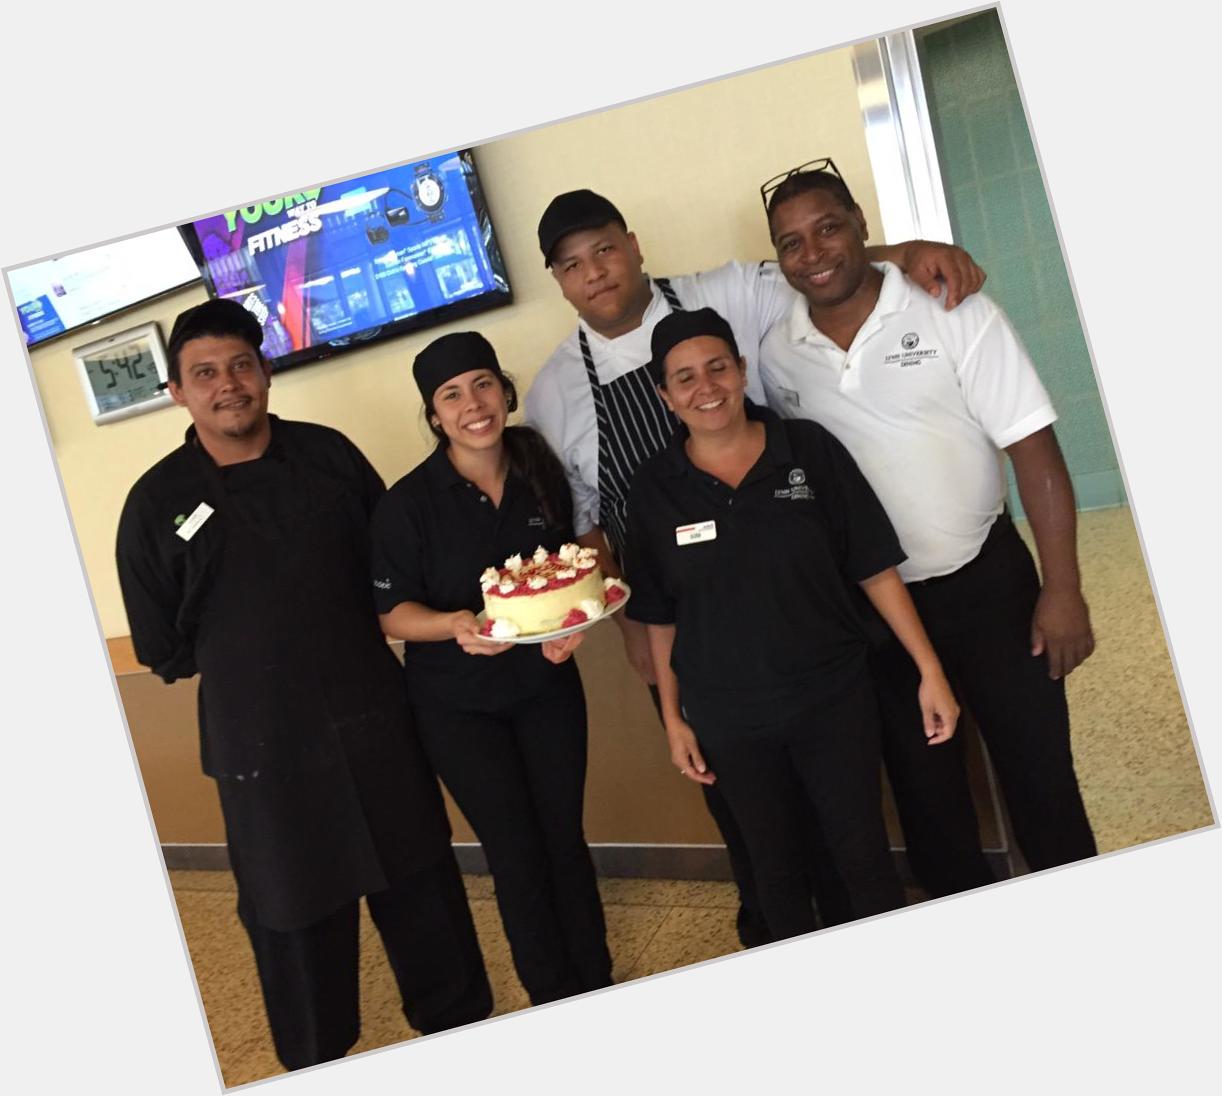   from Sunday and all employees at Lynn Universities Dinning Common, Happy Birthday Mariana 